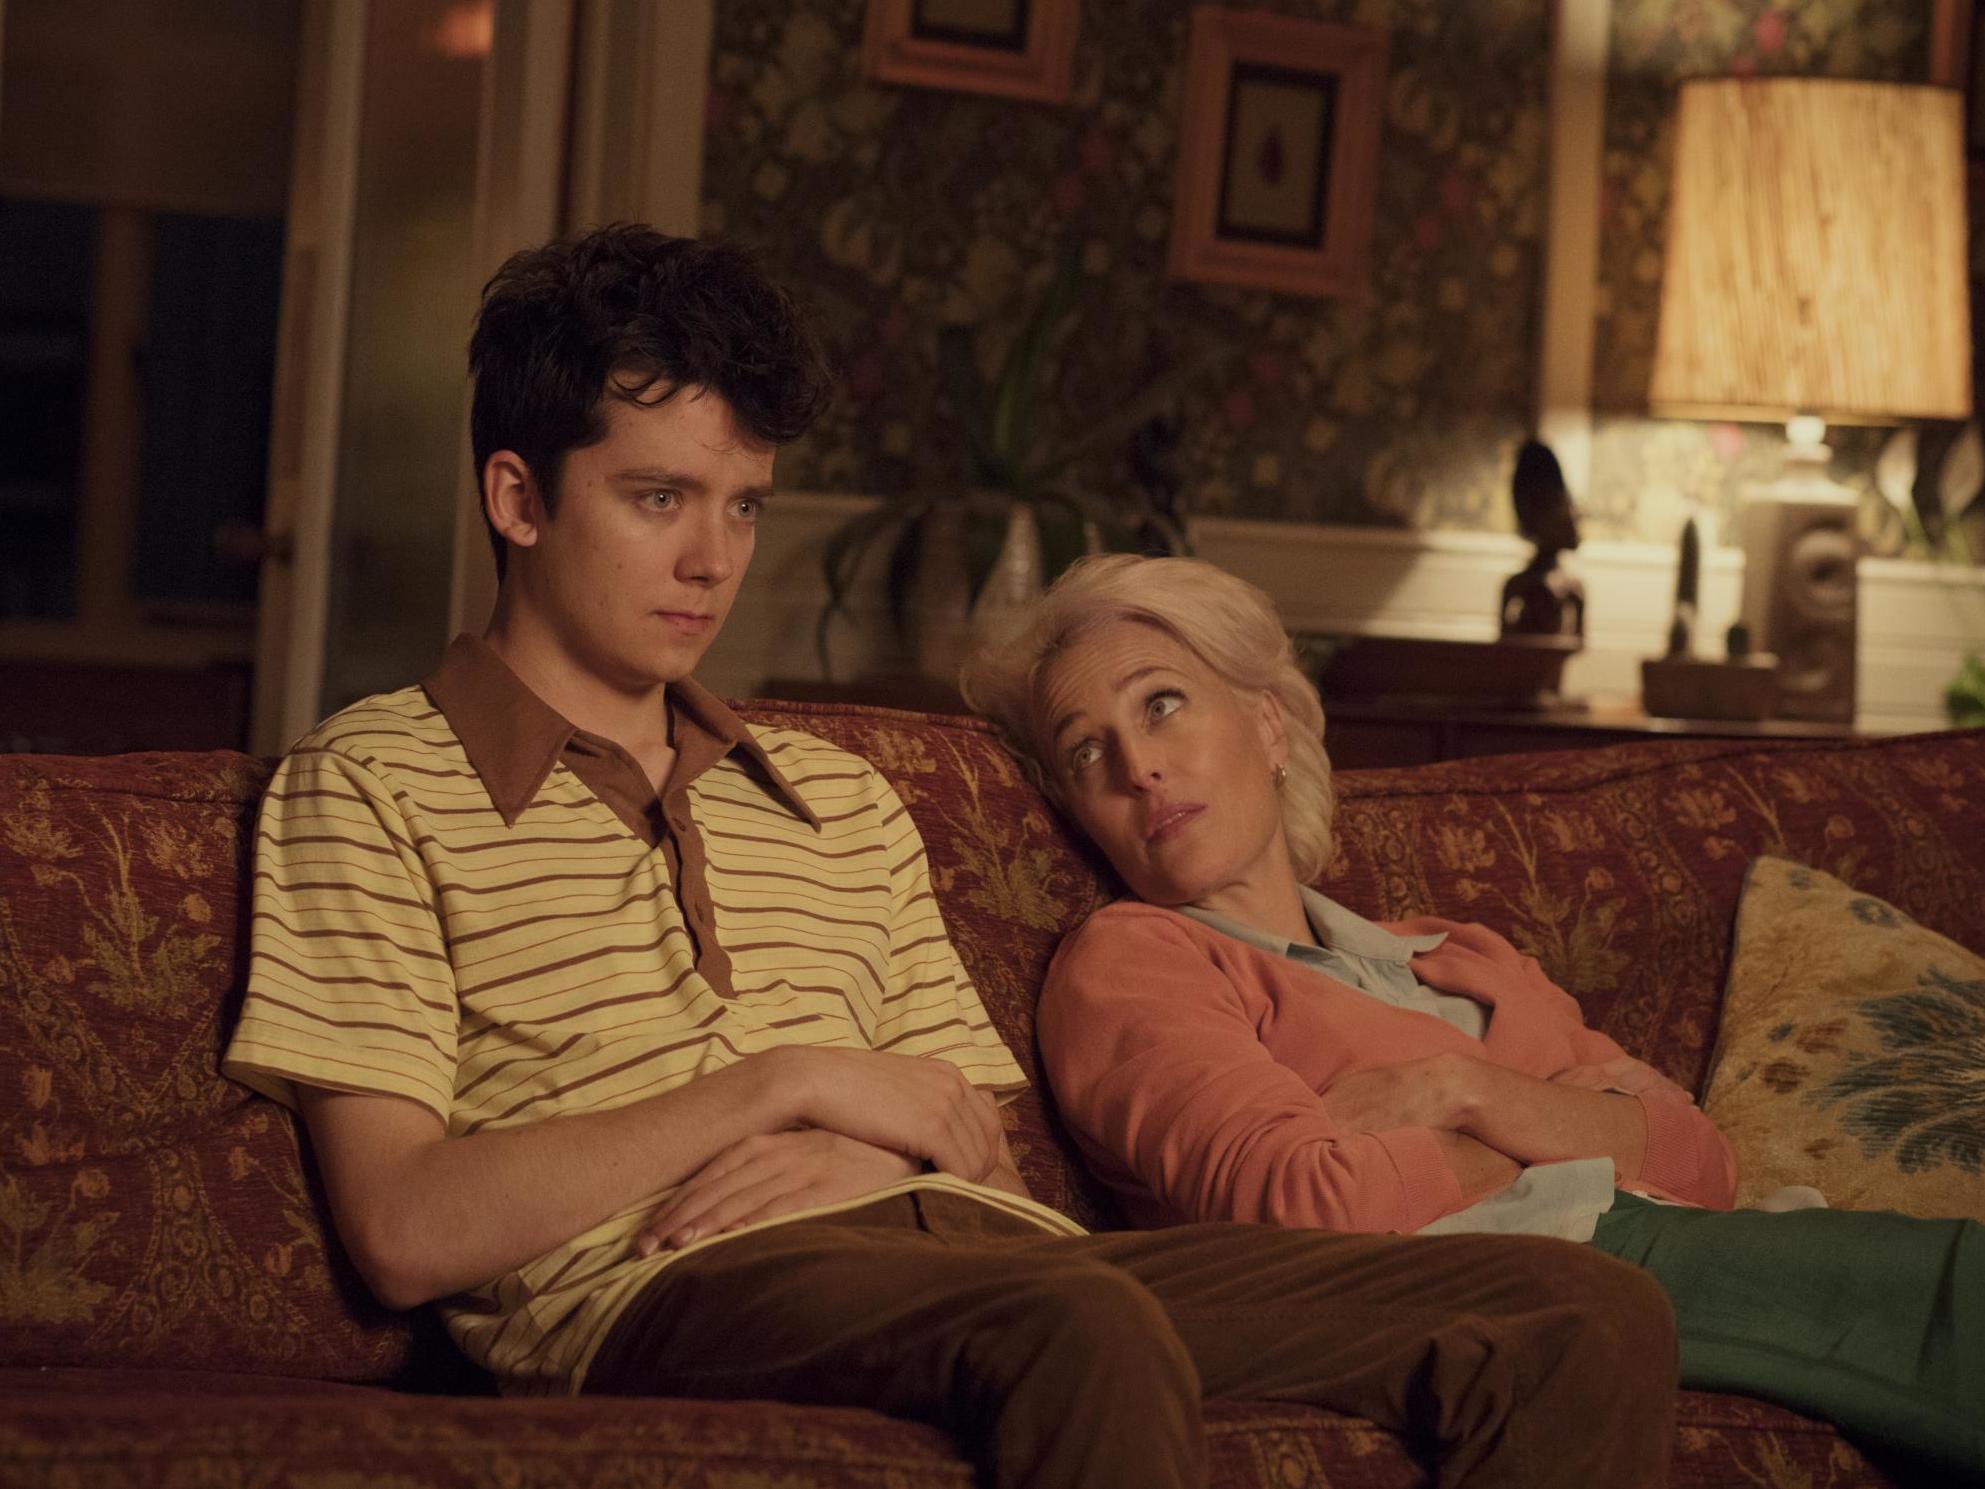 Asa Butterfield and Gillian Anderson in ‘Sex Education’